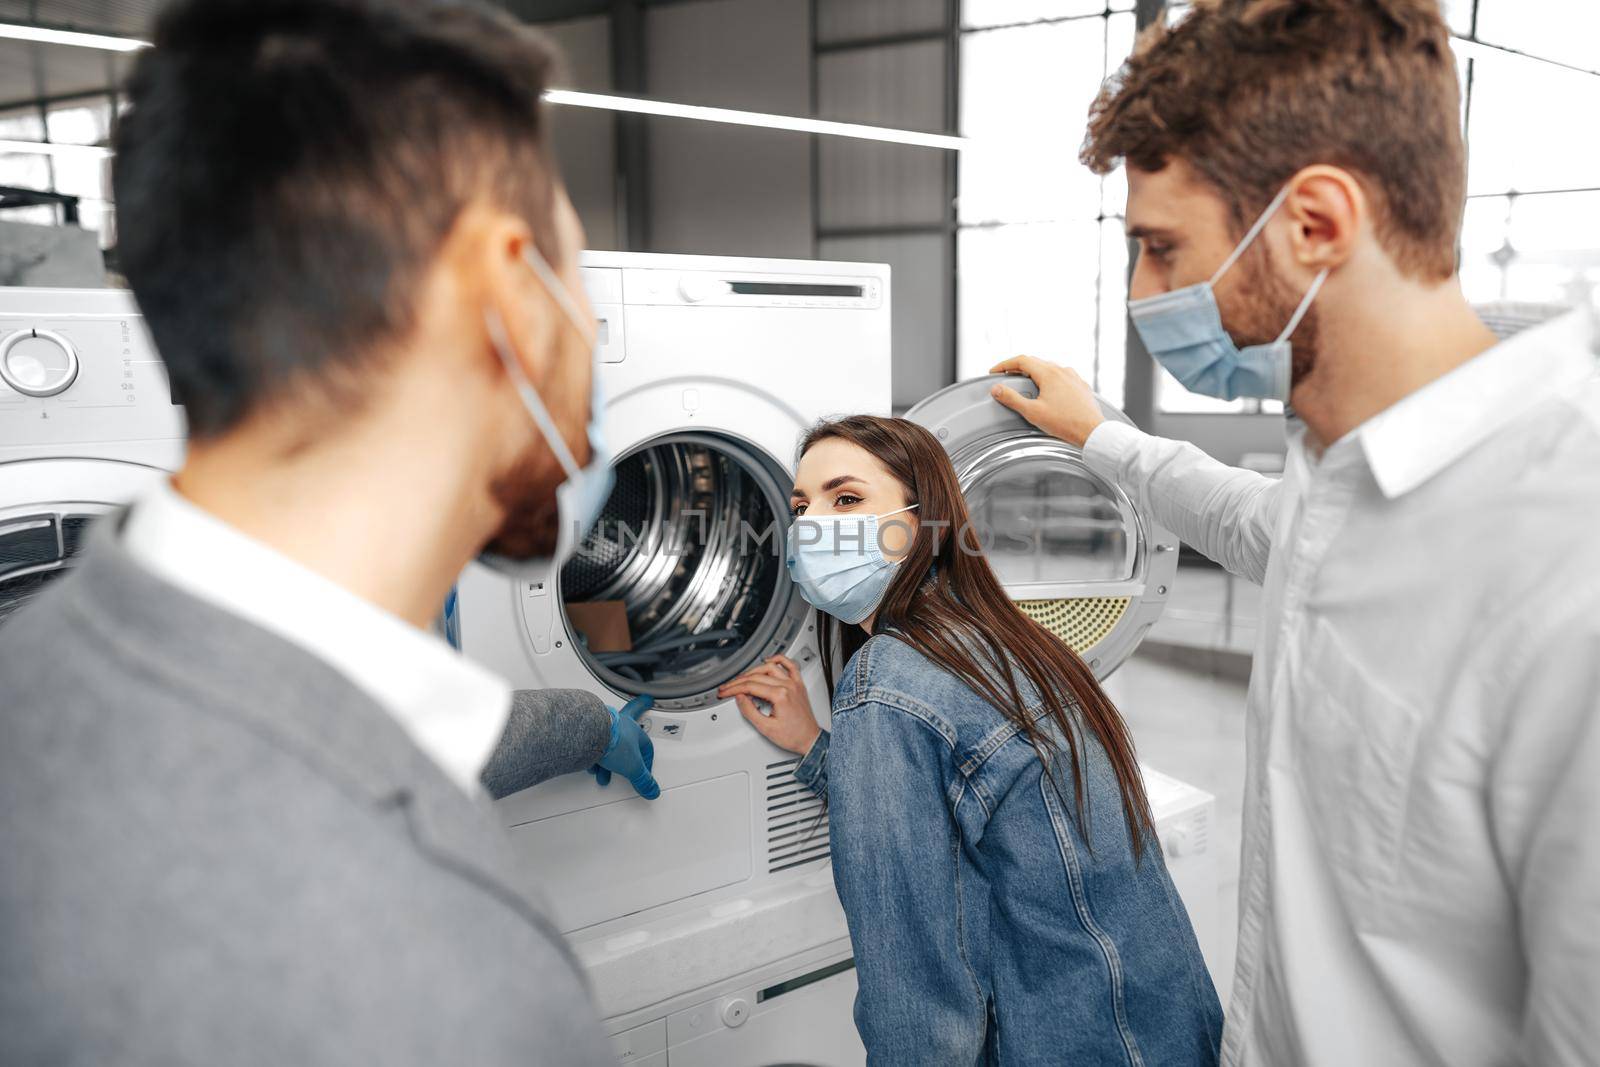 Salesman in hypermarket wearing medical mask demonstrates his clients a new washing machine, close up